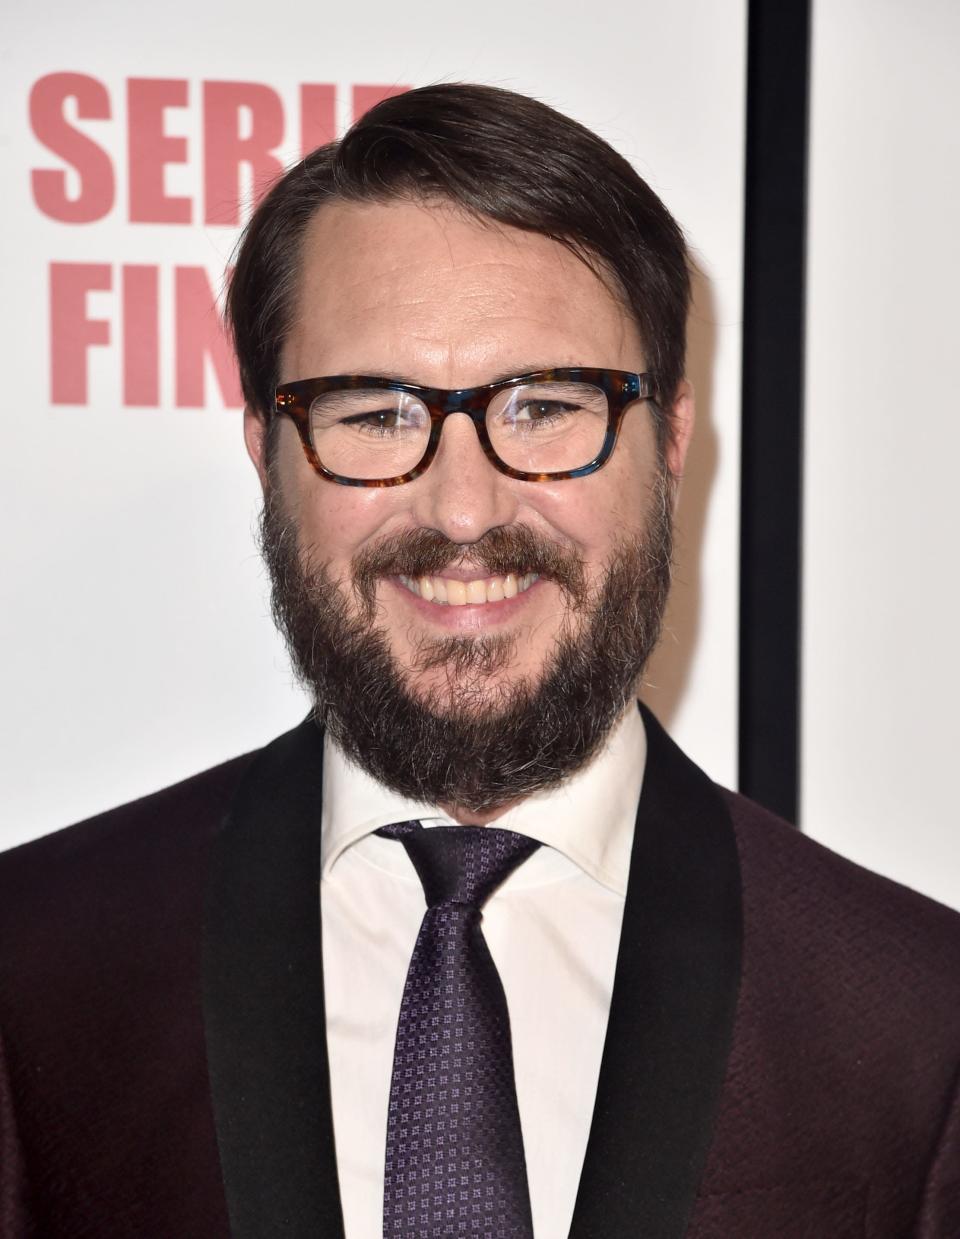 During an interview with Access Hollywood published May 24, 2022, actor Wil Wheaton opened up about the inner turmoil he suffered as a child actor, revealing he felt suicidal as a teenager.